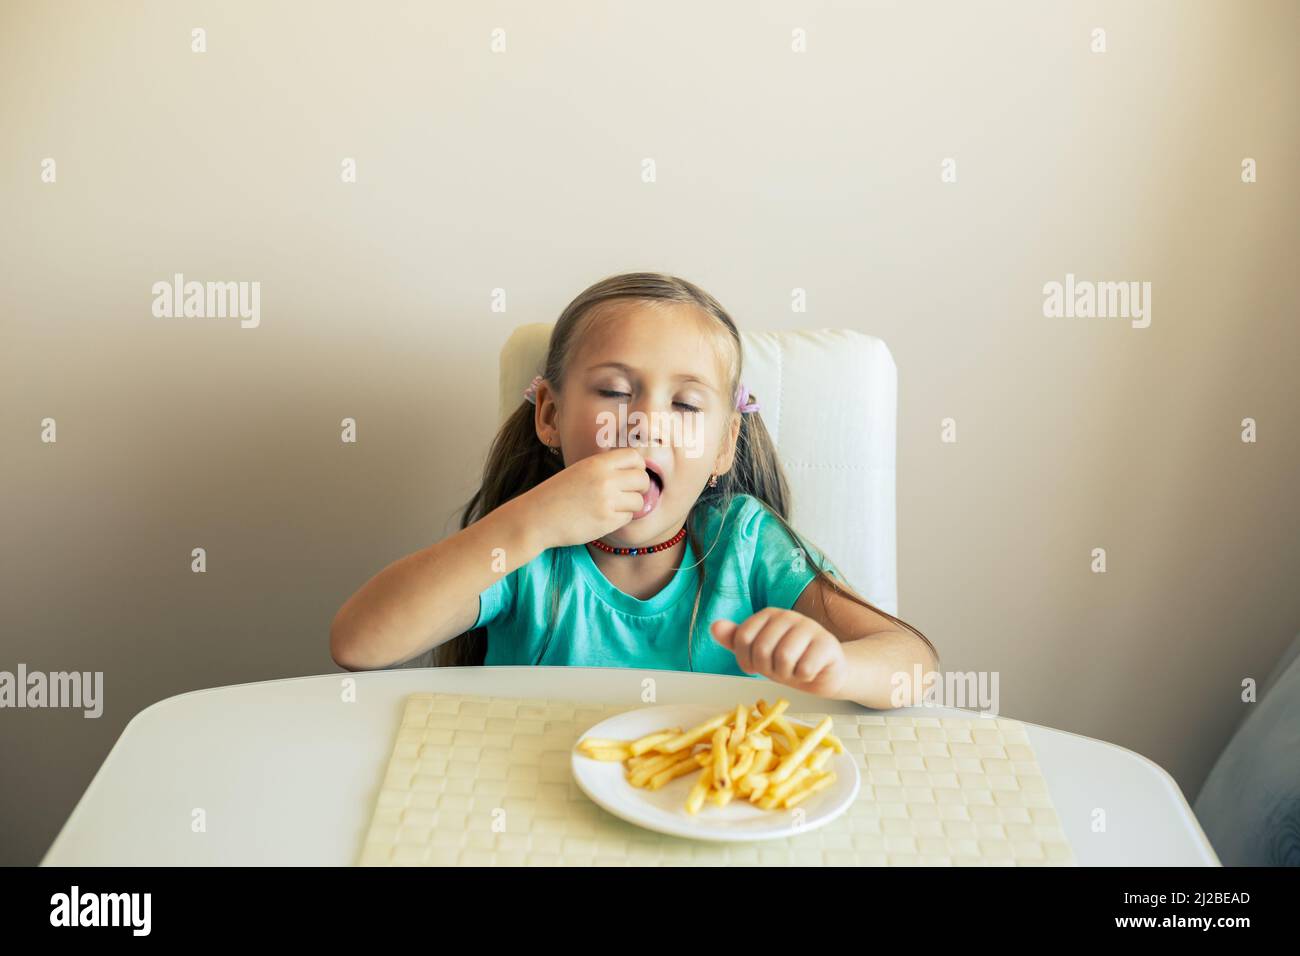 Close-up of a little girl eating French fries at the kitchen Stock Photo